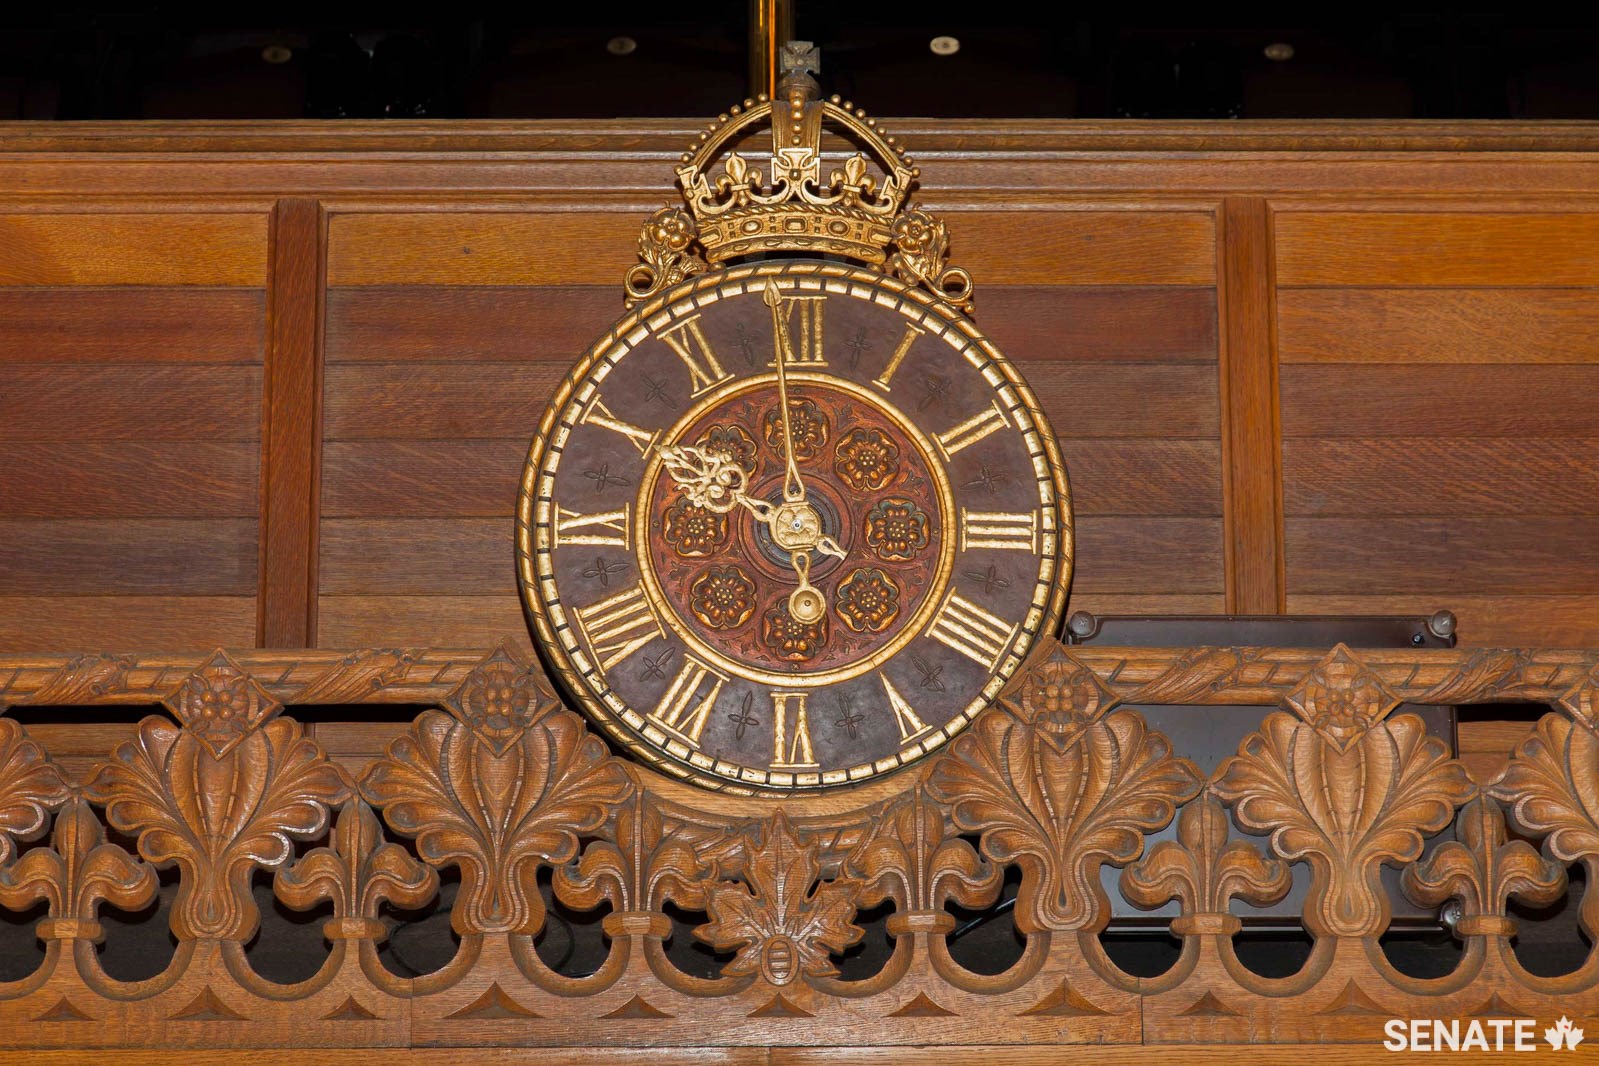 The clock above the Senate Chamber entrance features a partly shrouded Ottawa Senators hockey team logo. One of the sculptors working under Elzéar Soucy added it in the 1920s.